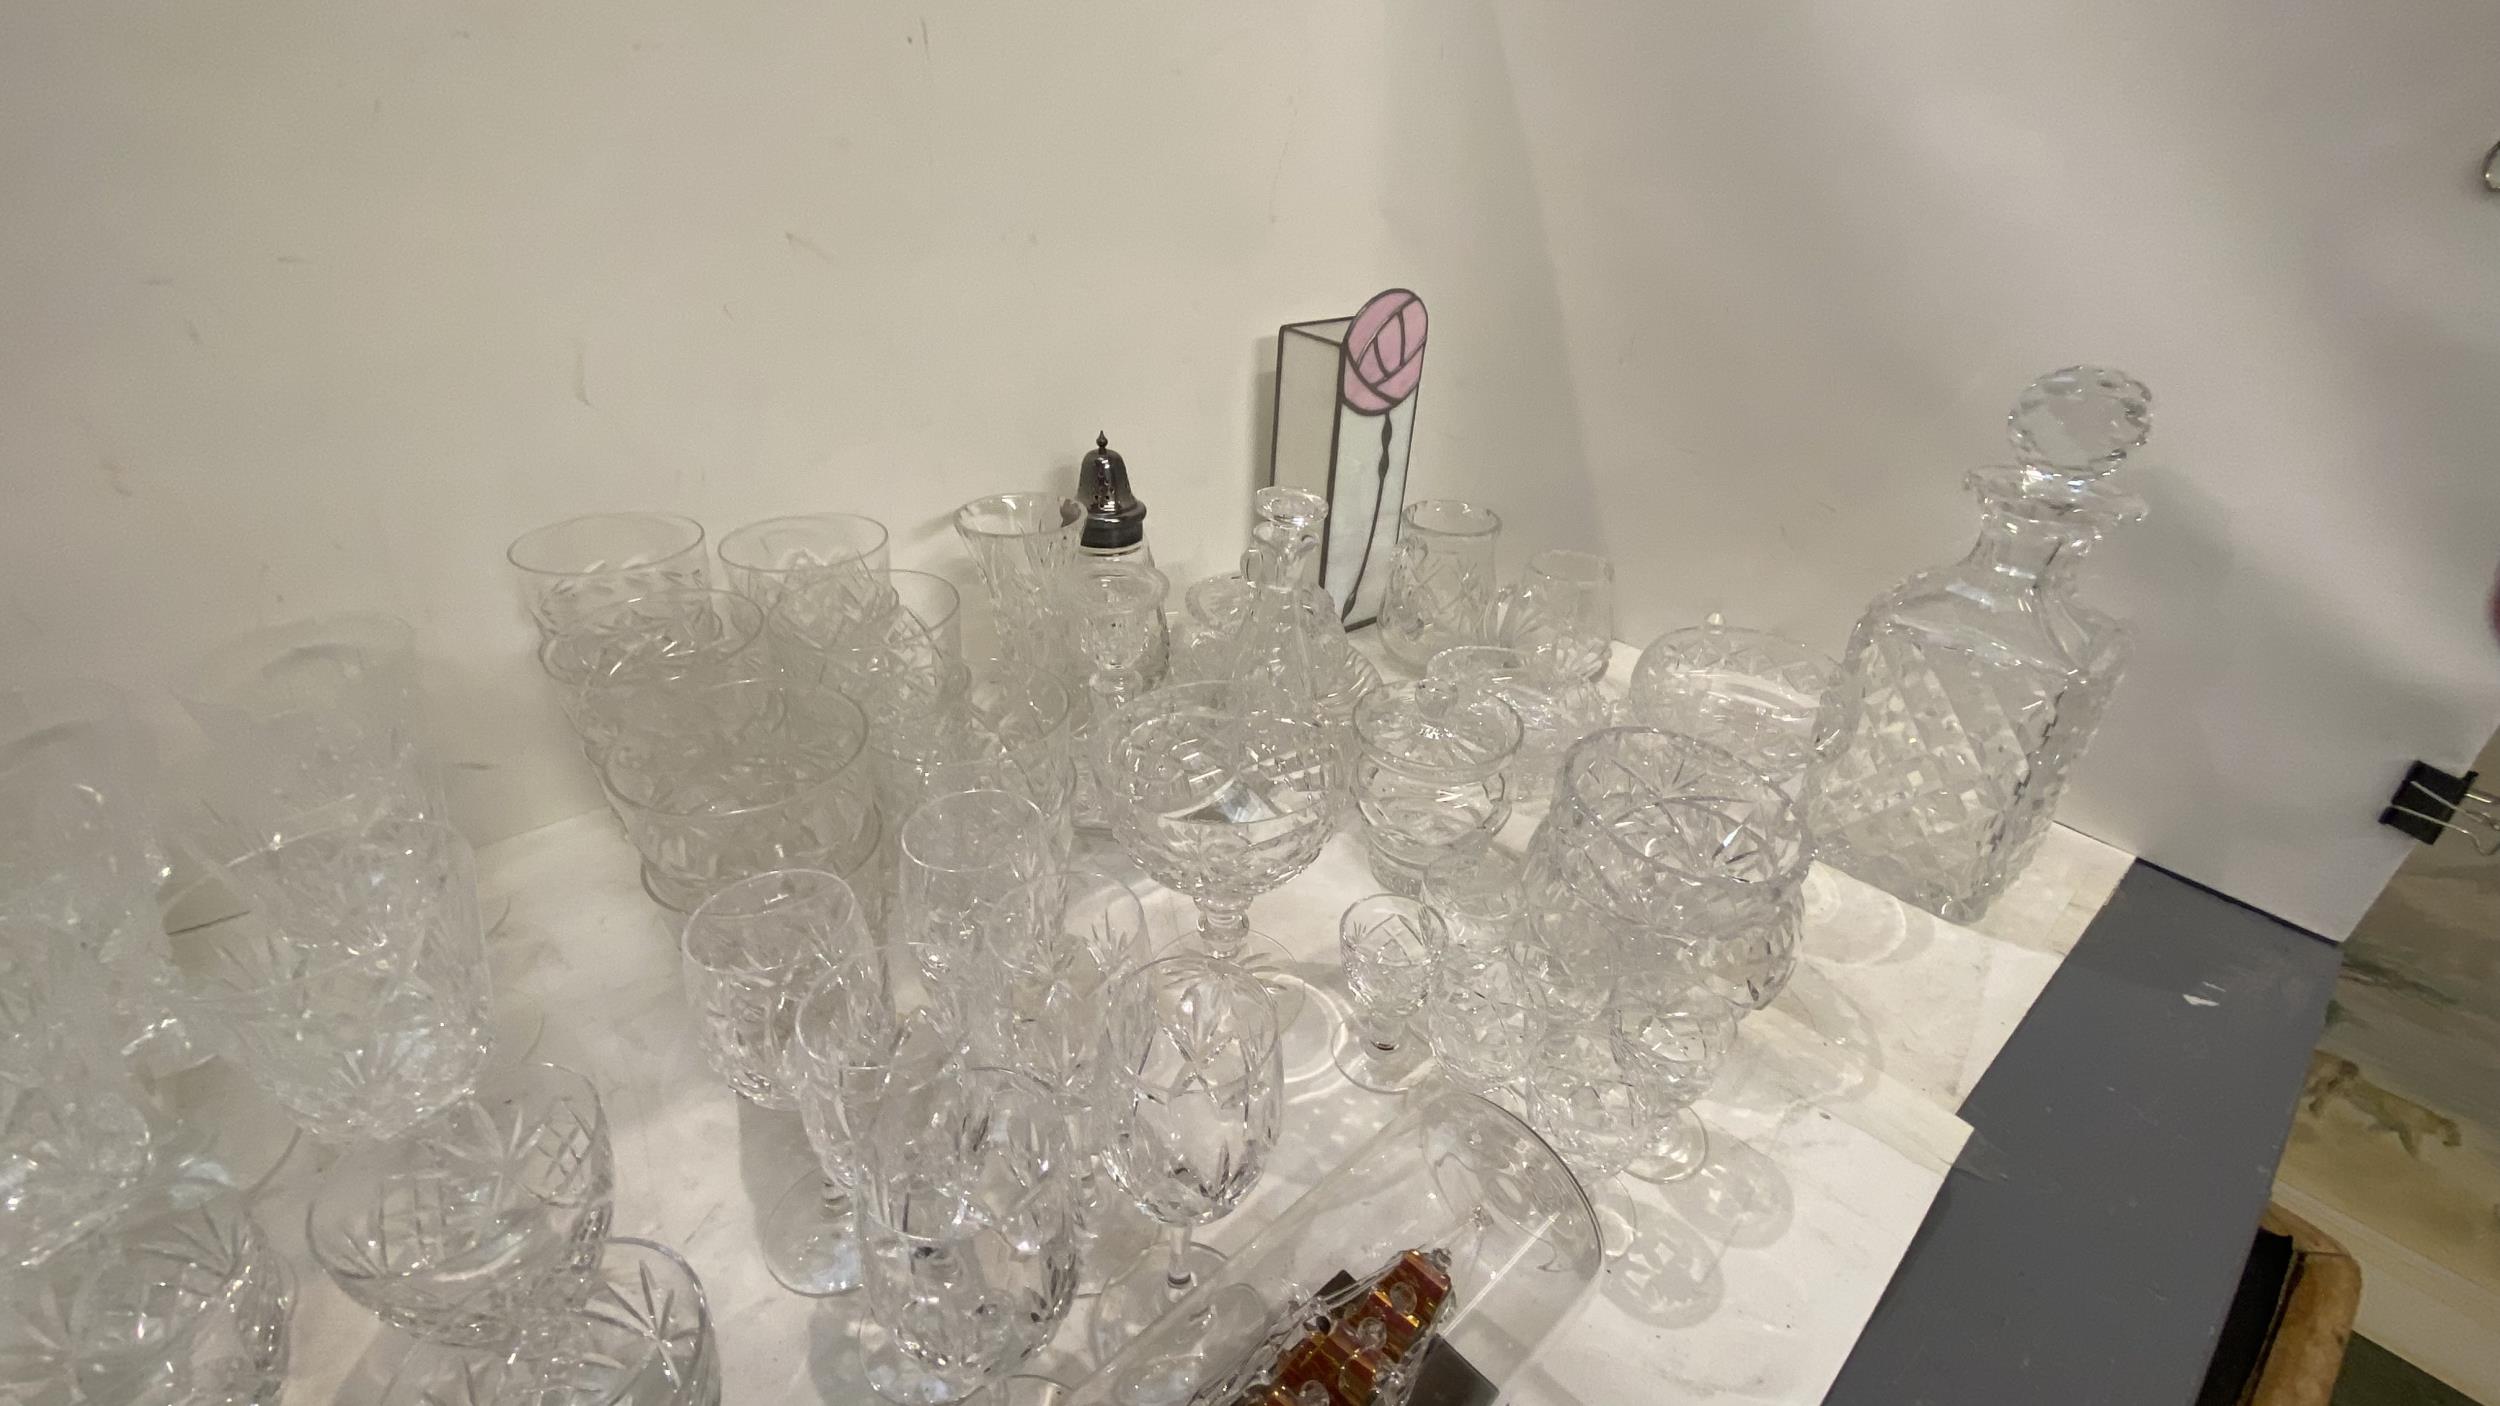 Large qty of glass wear including decanters, vases, wine glassed, tumblers etc. - Image 6 of 7